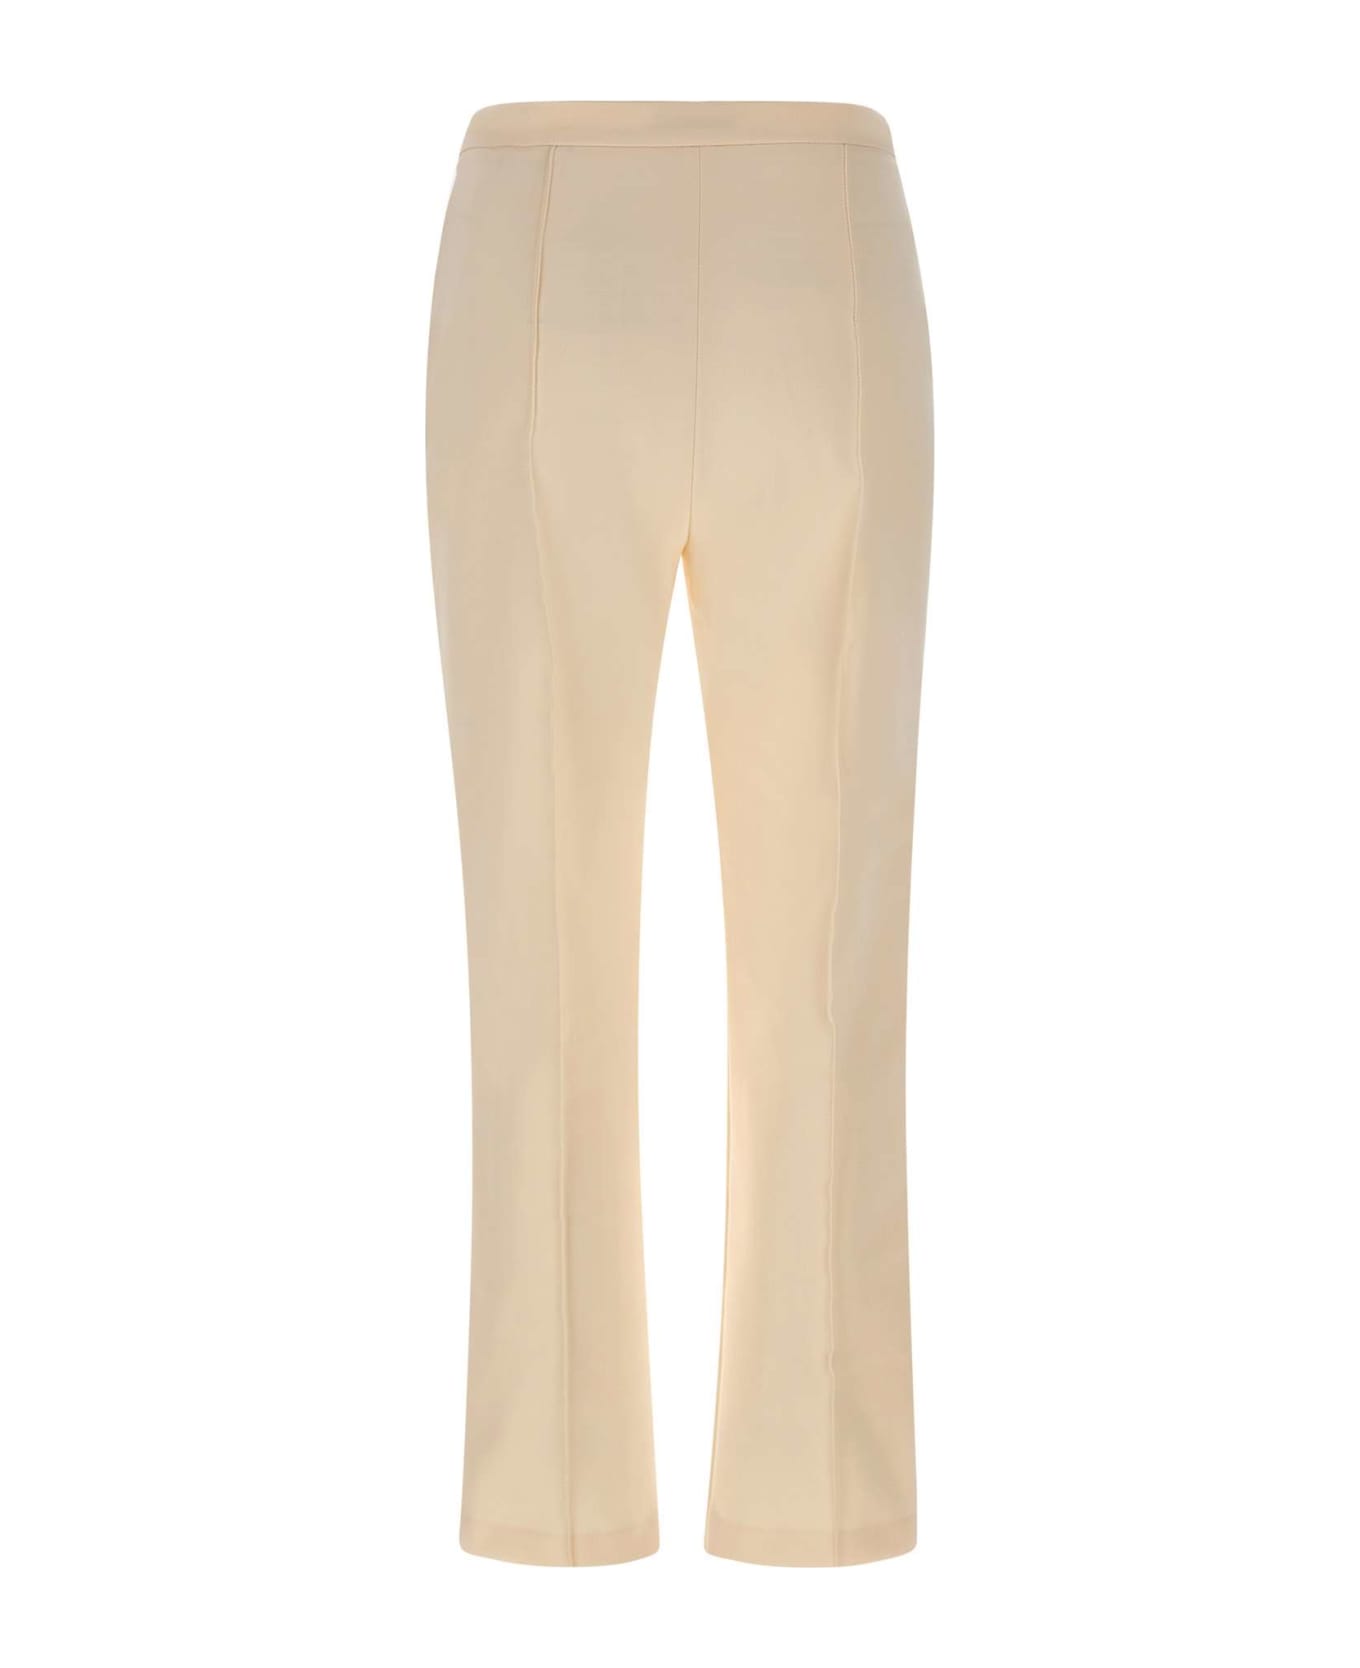 Elisabetta Franchi 'daily' Trousers - BEIGE ボトムス